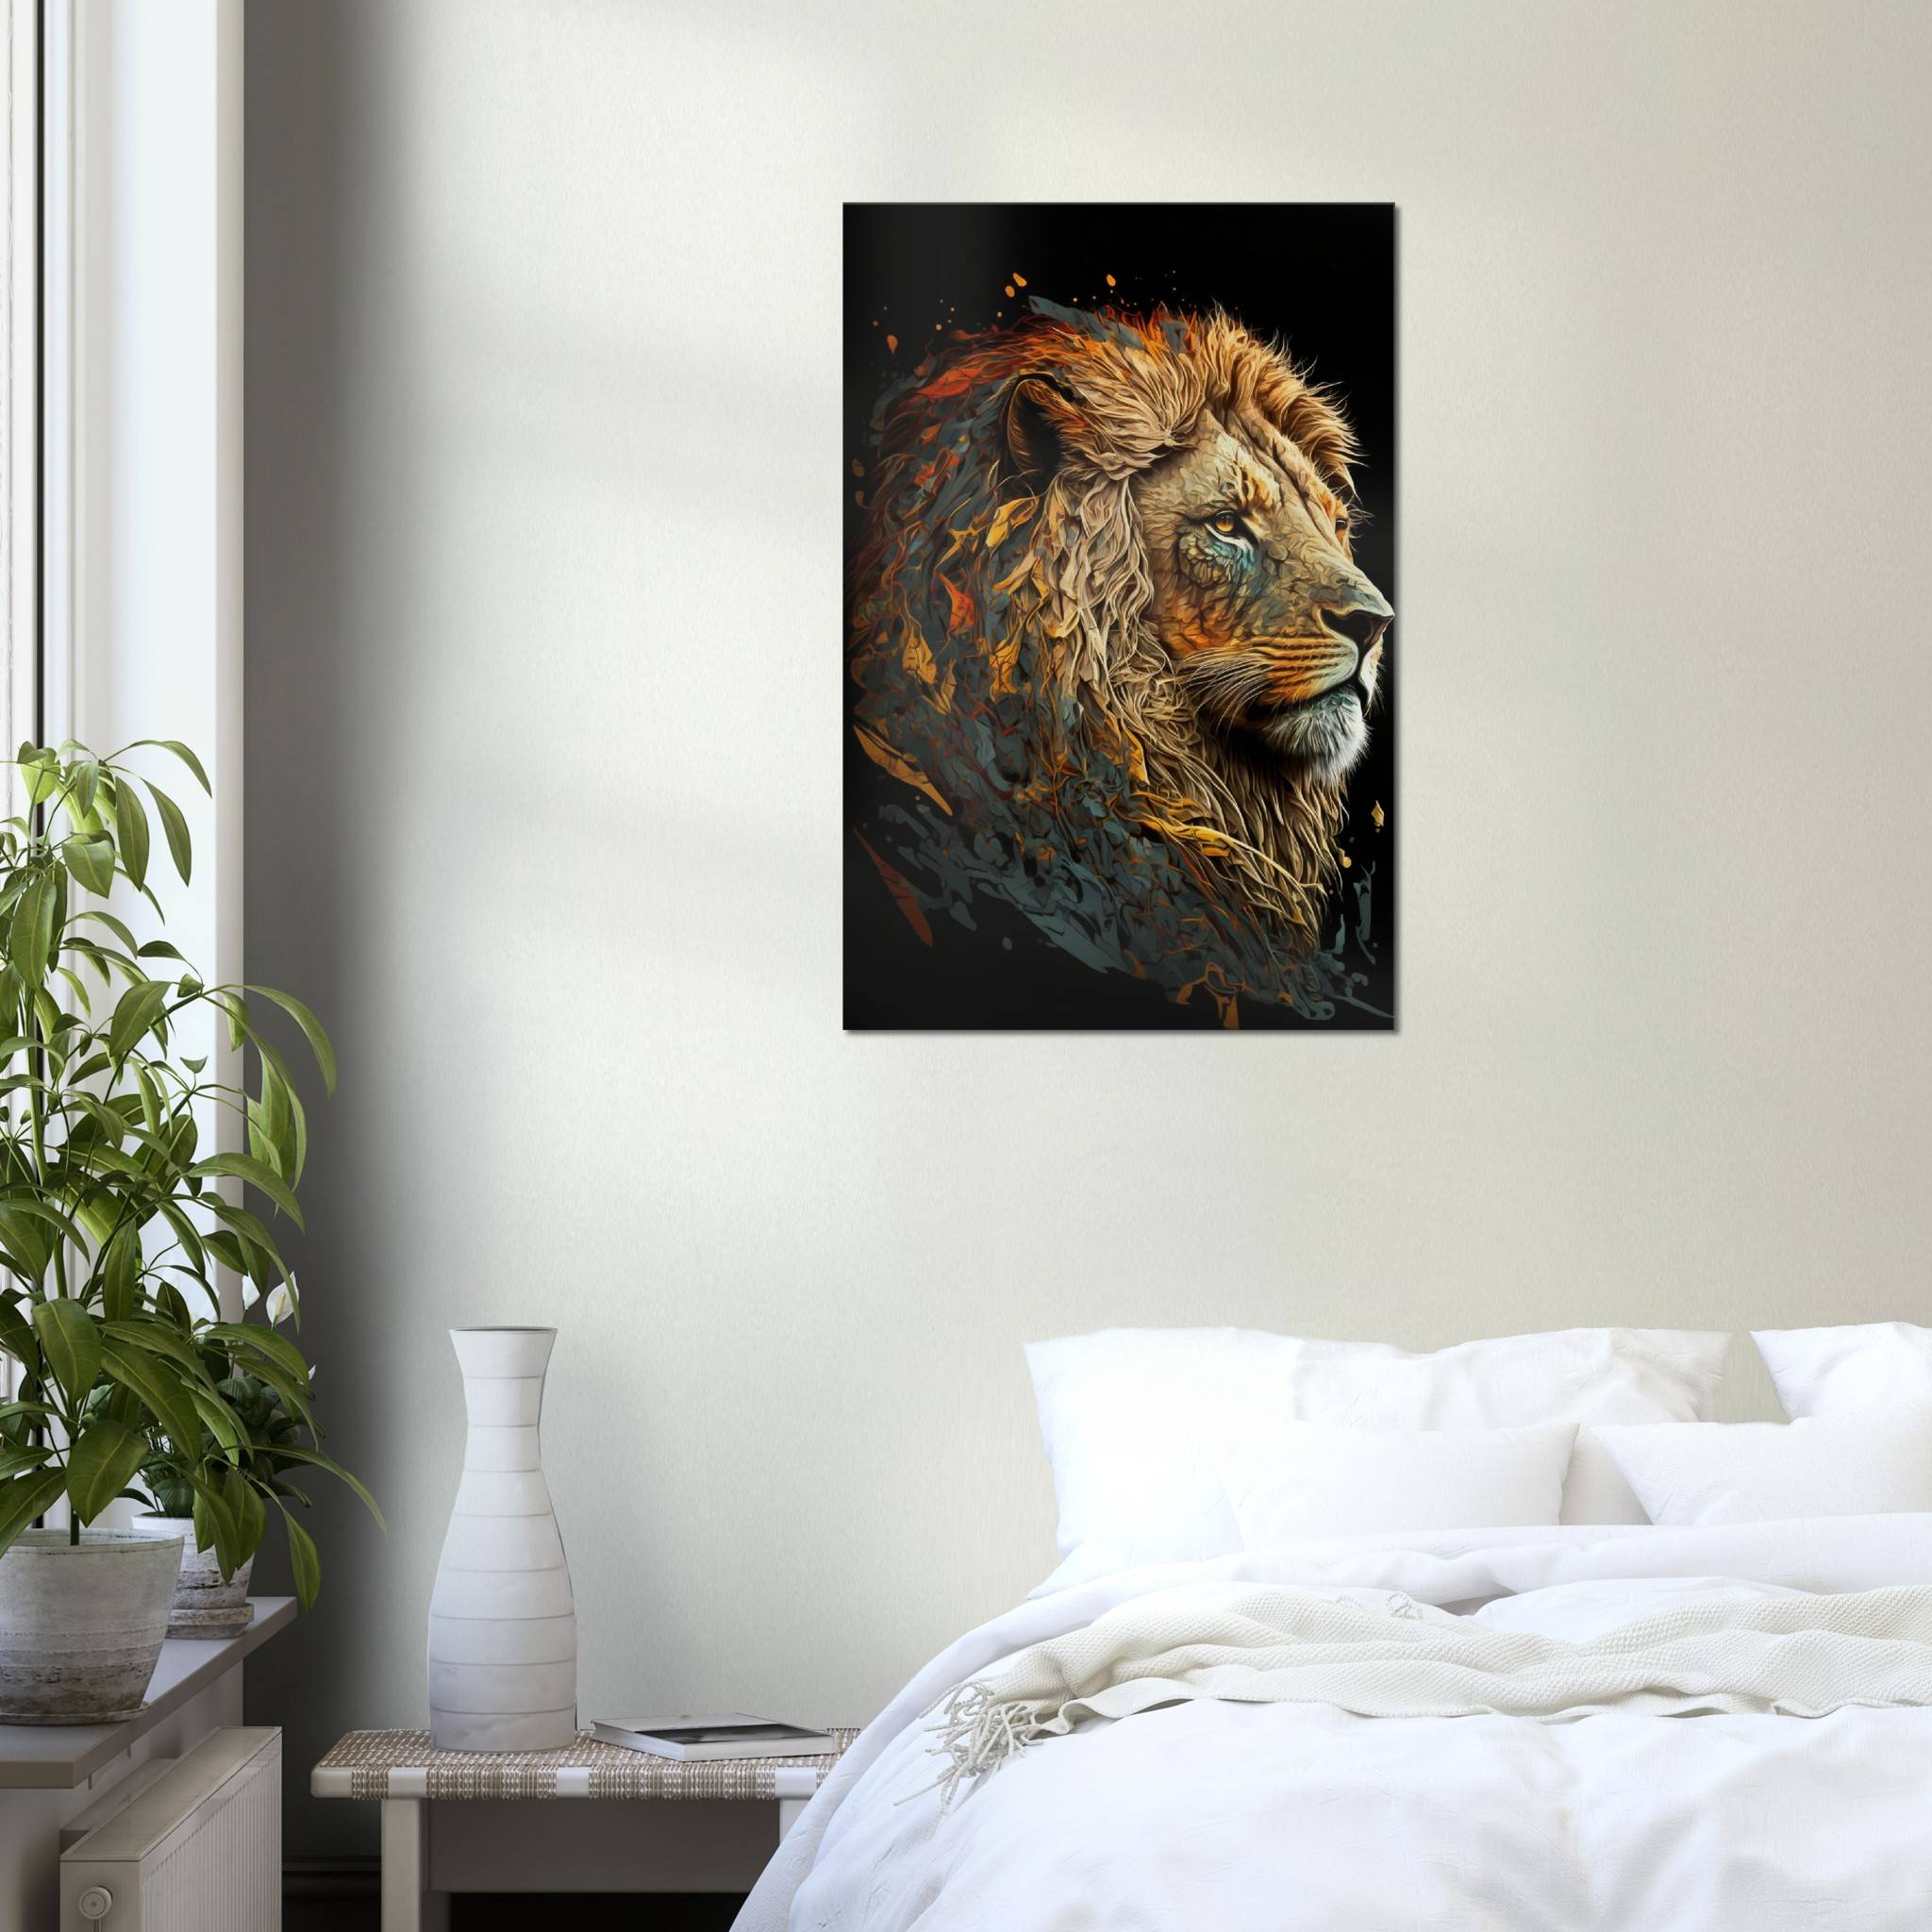 Lion Close to Reality 5 / 50 x 75 cm (Canvas Print) Canvas Print Canvas reproduction The Pianist Print On Demand Fabled Gallery https://fabledgallery.art/product/lion-close-to-reality-5-50-x-75-cm-canvas-print/